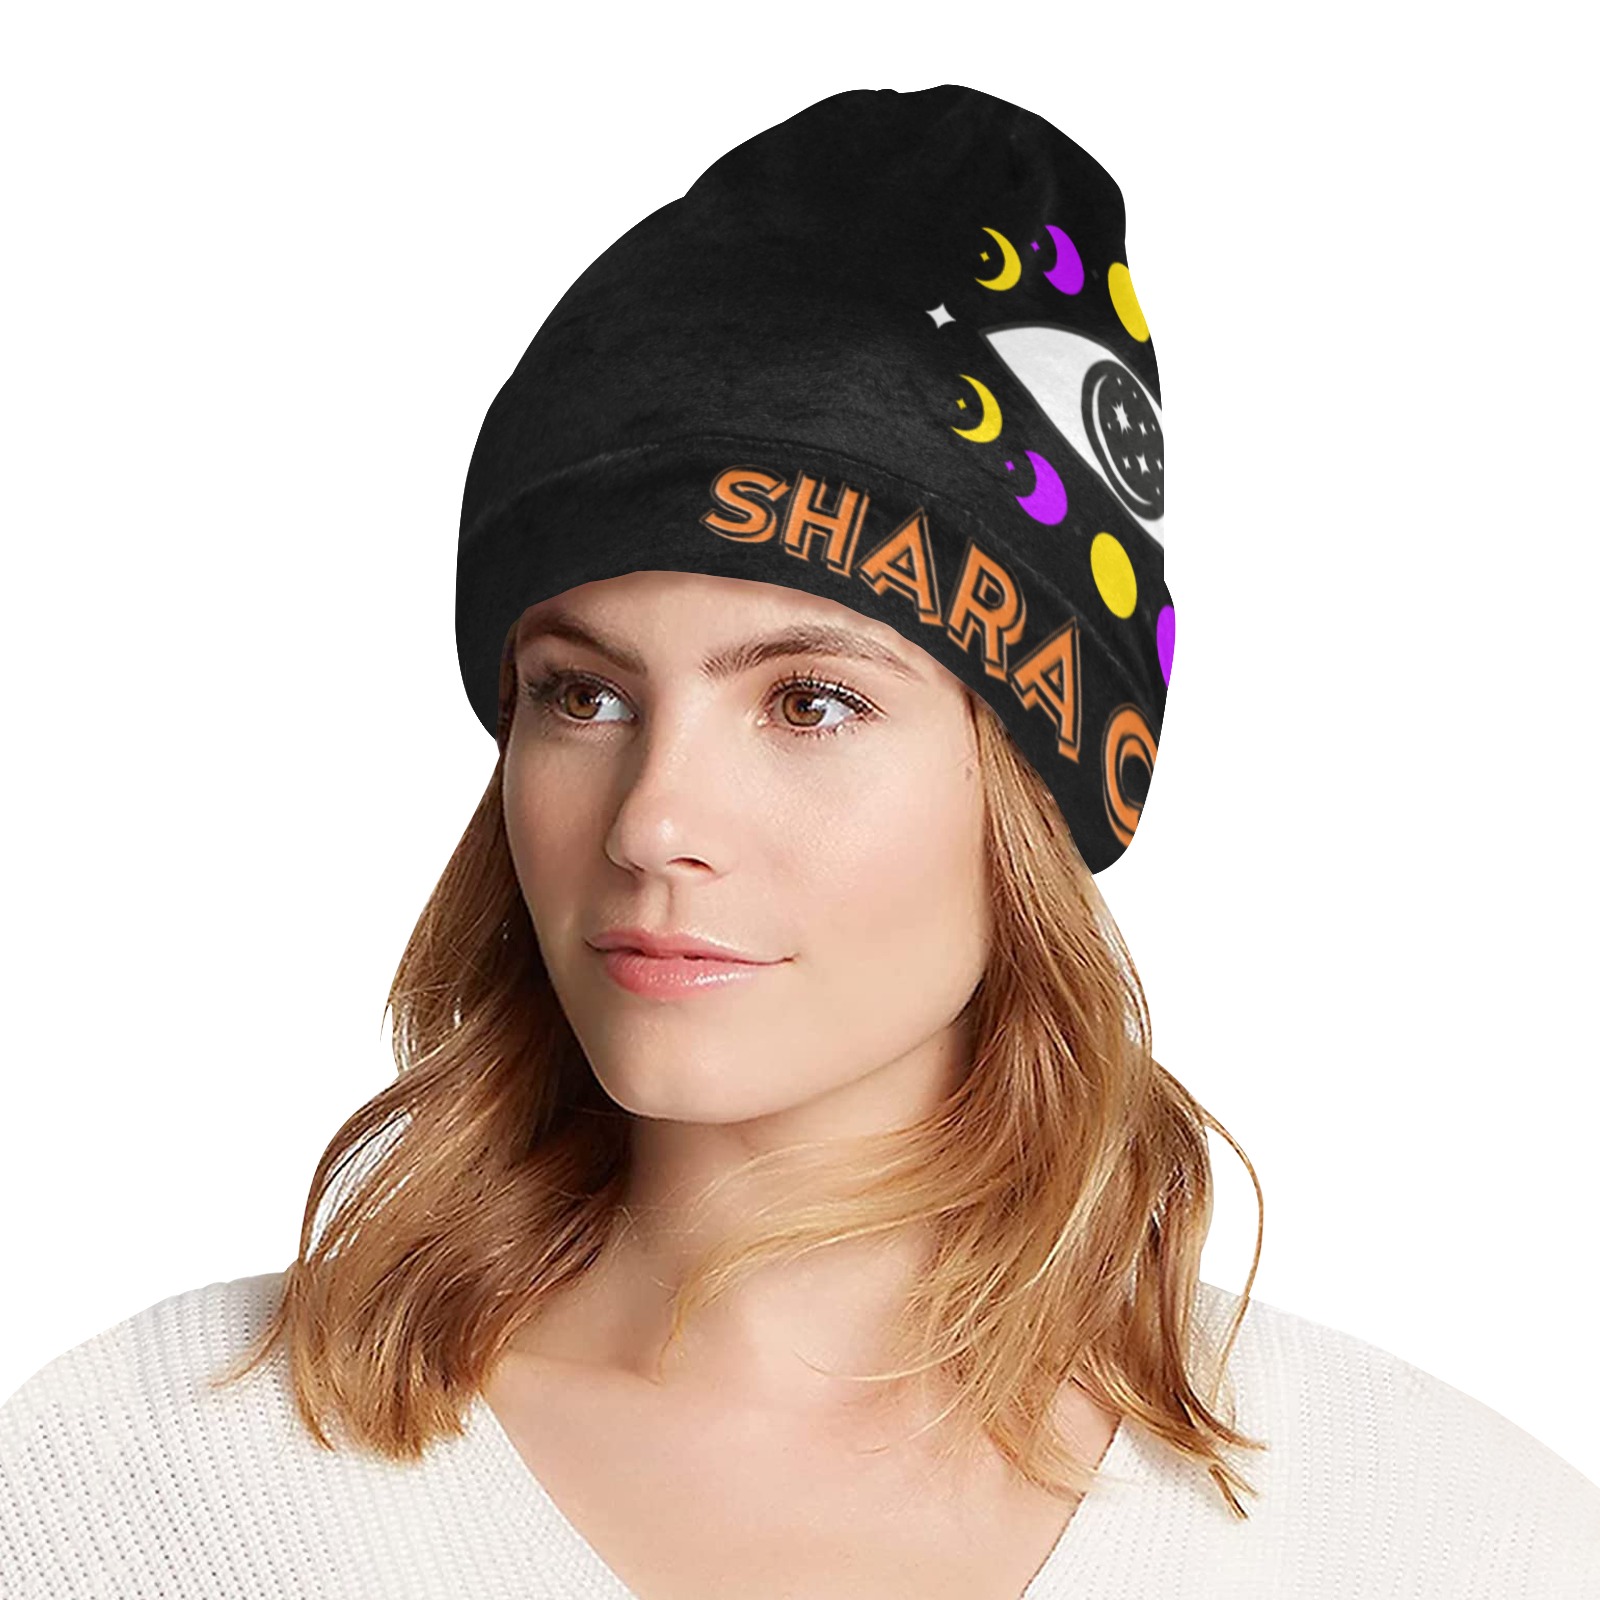 Shara Crow Illy Eye All Over Print Beanie for Adults